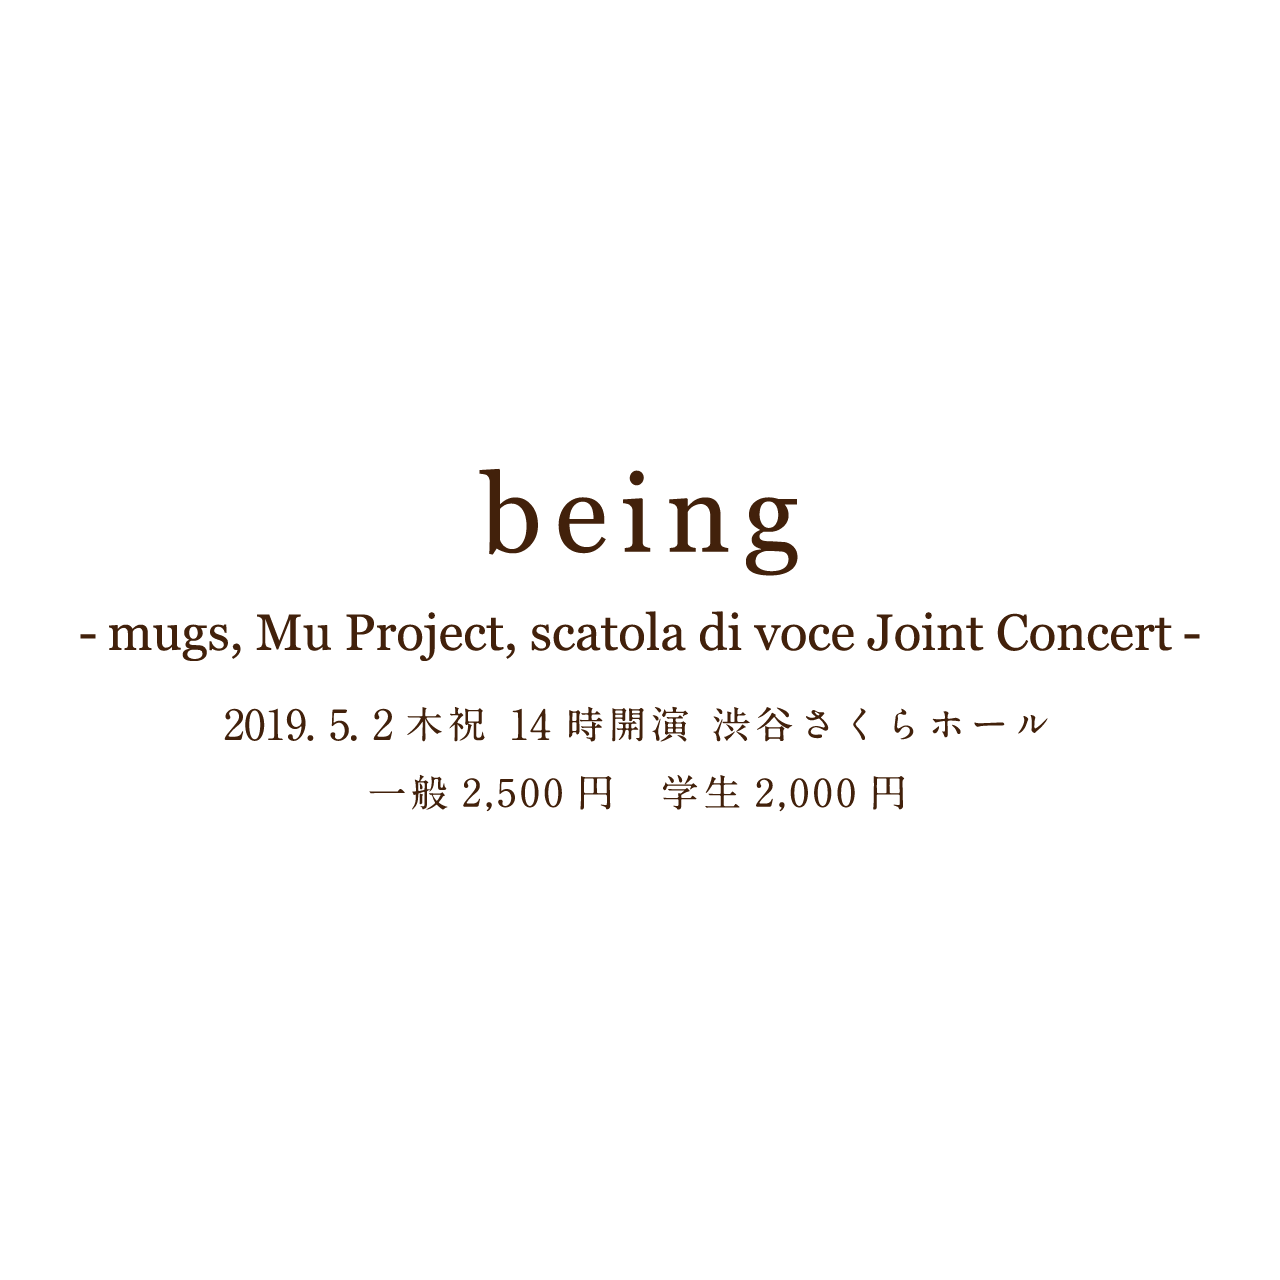 being -mugs, Mu Project, scatola di voce Joint Concert-